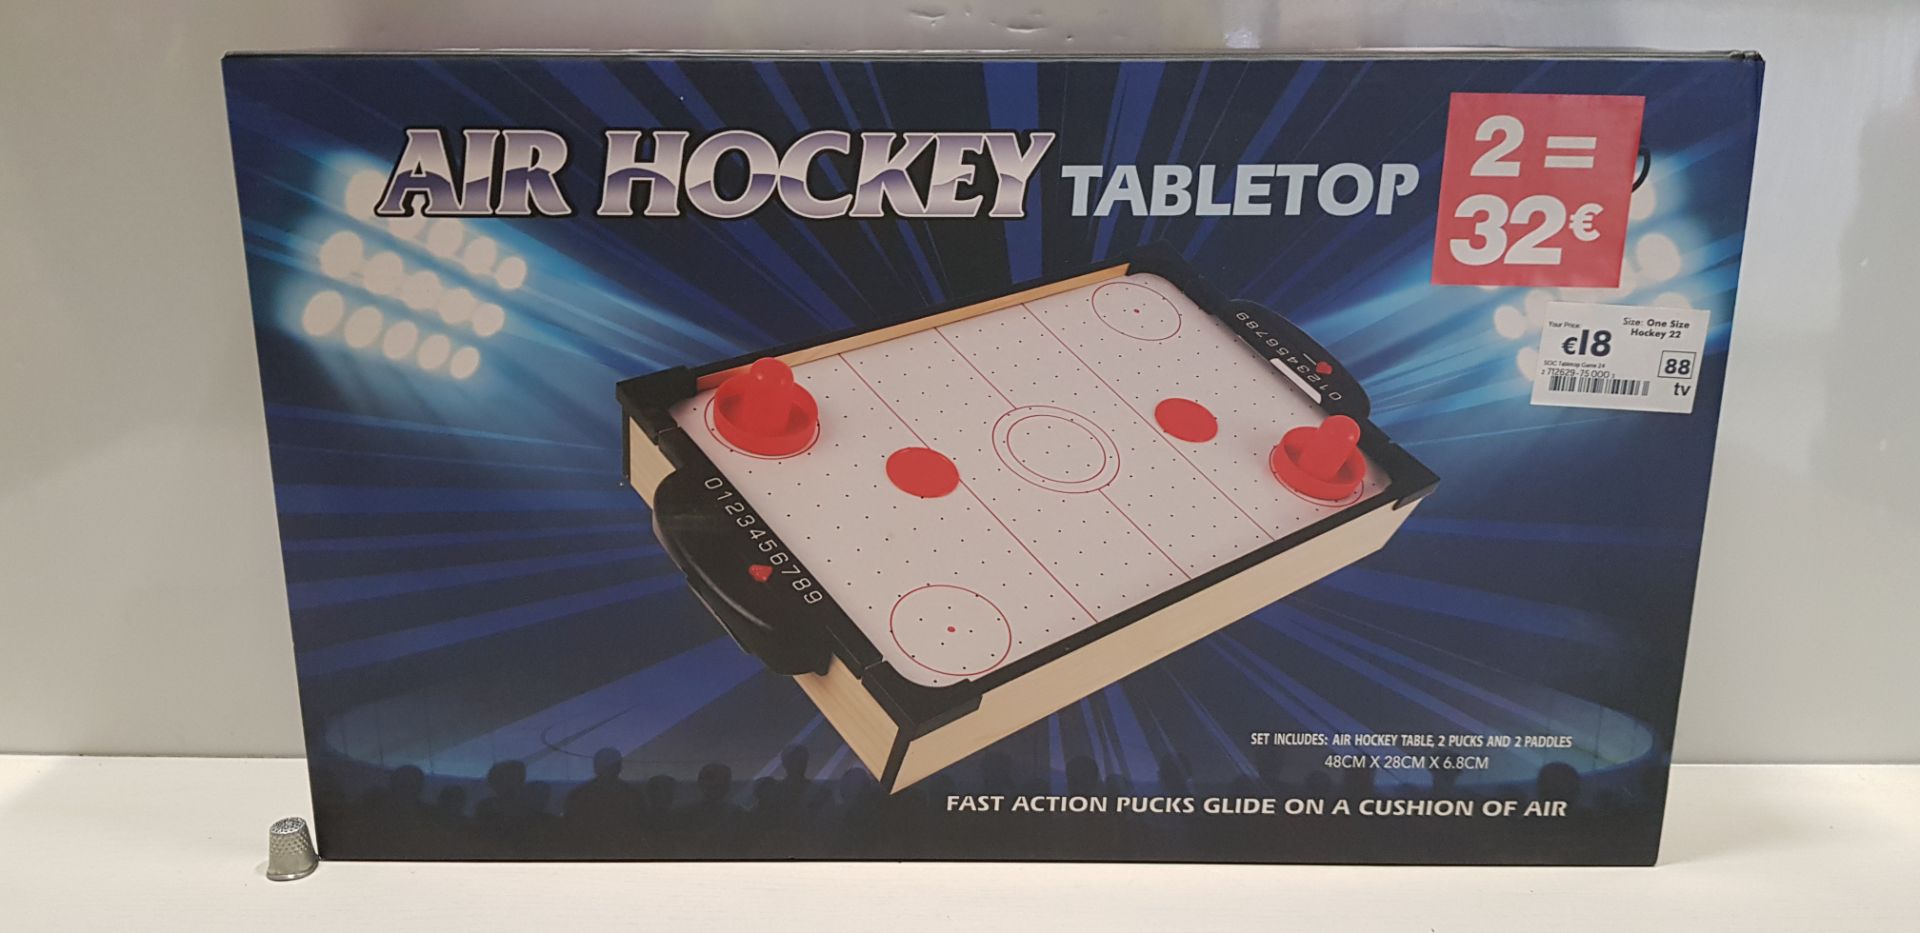 48 X BRAND NEW BOXED AIR HOCKEY TABLE TOP 48CM X 28CM X 6.8CM INCLUDES 2 X PUCKS AND 2 X PADDLES -